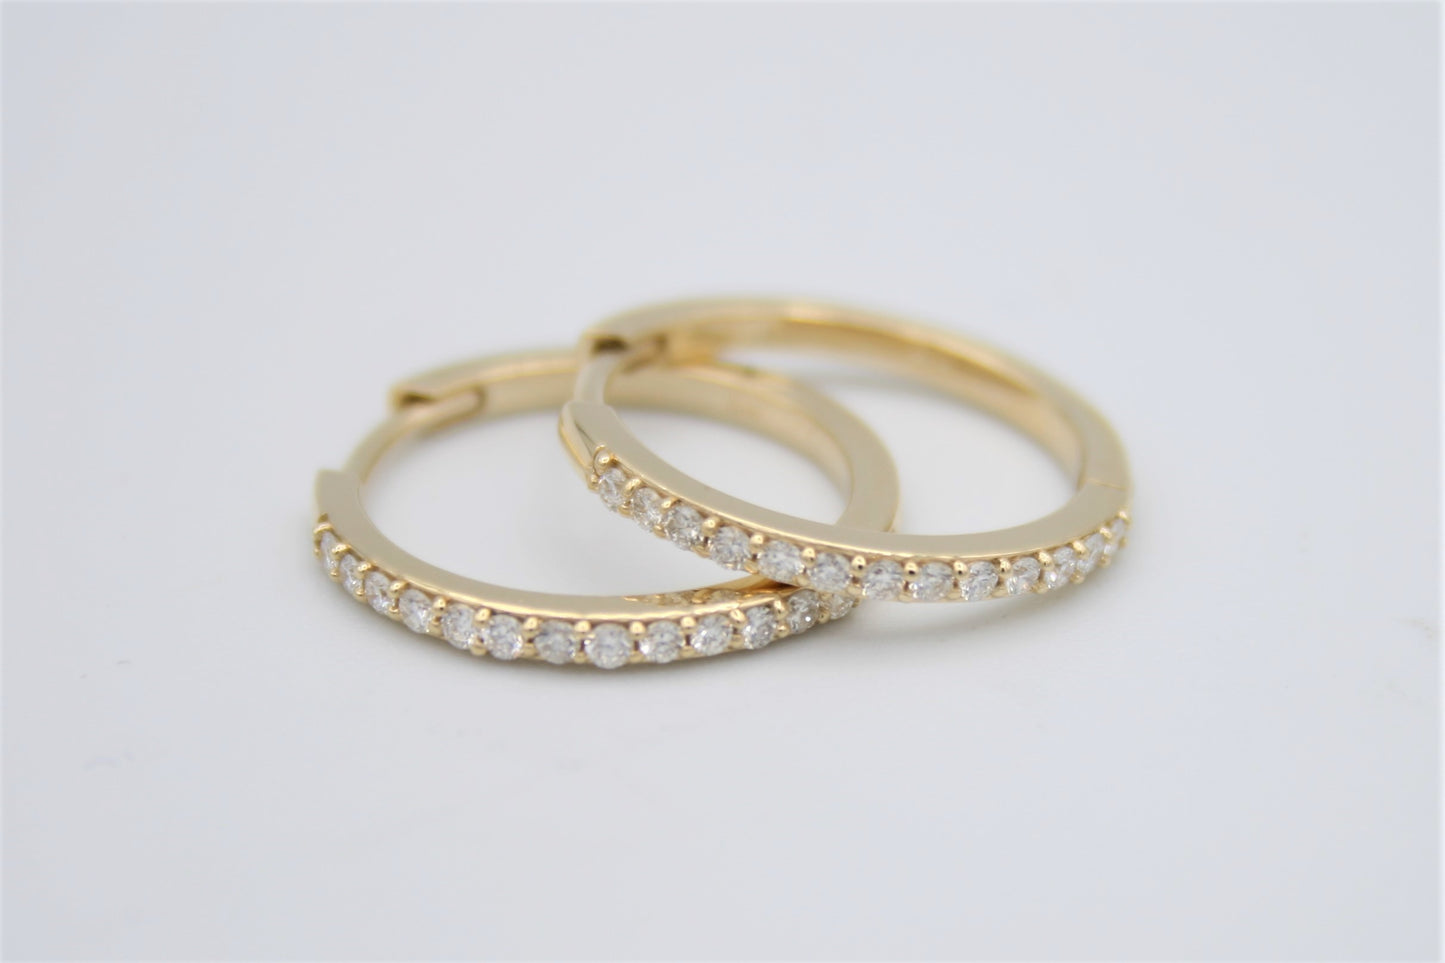 Diamond and Gold Hoops